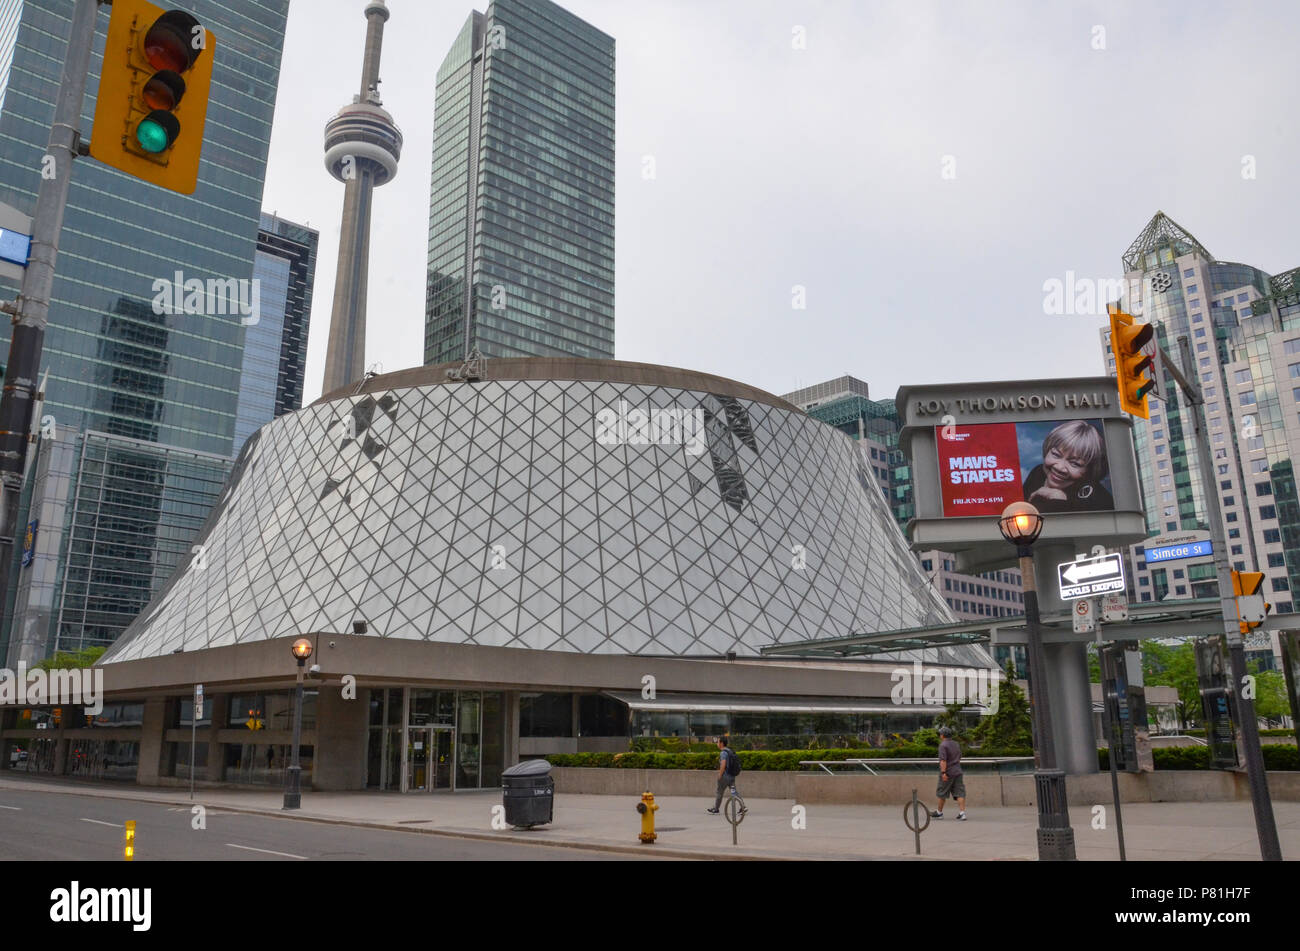 TORONTO, ON / CANADA - MAY 26, 2018: Roy Thompson Hall, shown here, is the home of the Toronto Symphony Orchestra. Stock Photo